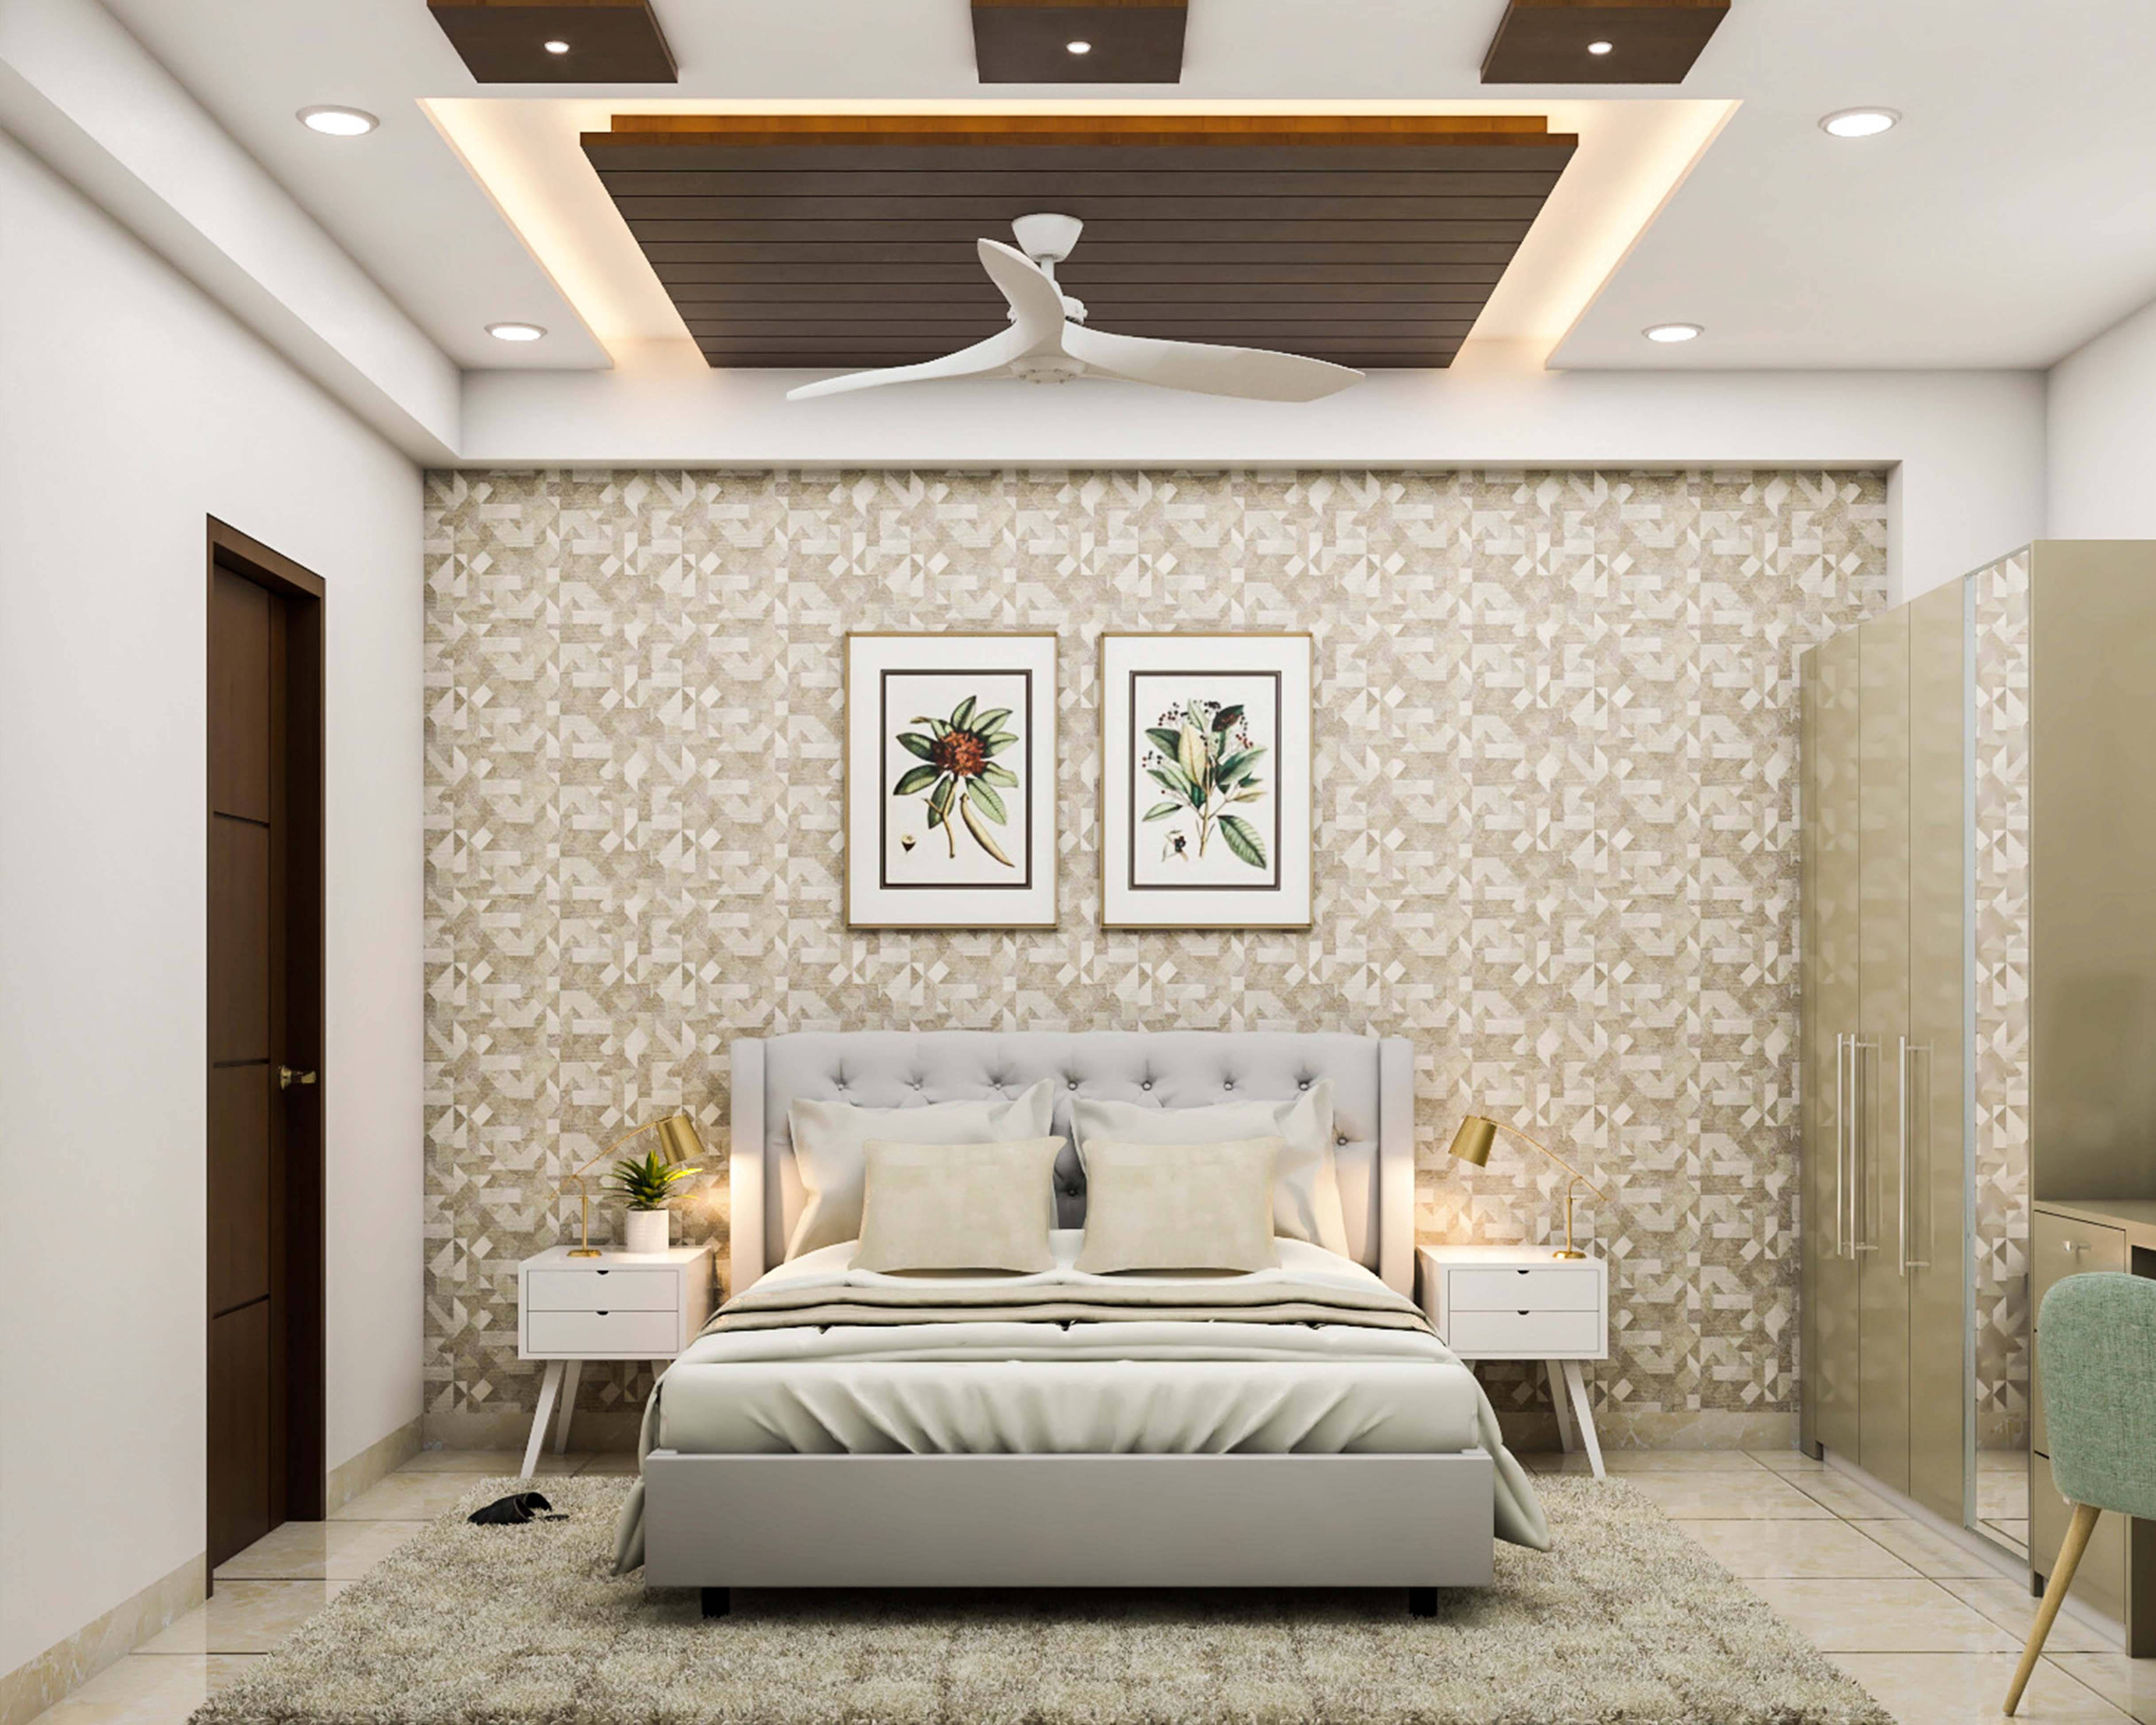 Horianzo Foam 3D Ceiling Wallpaper for Bedroom Hall Living Room Wal   wowouch